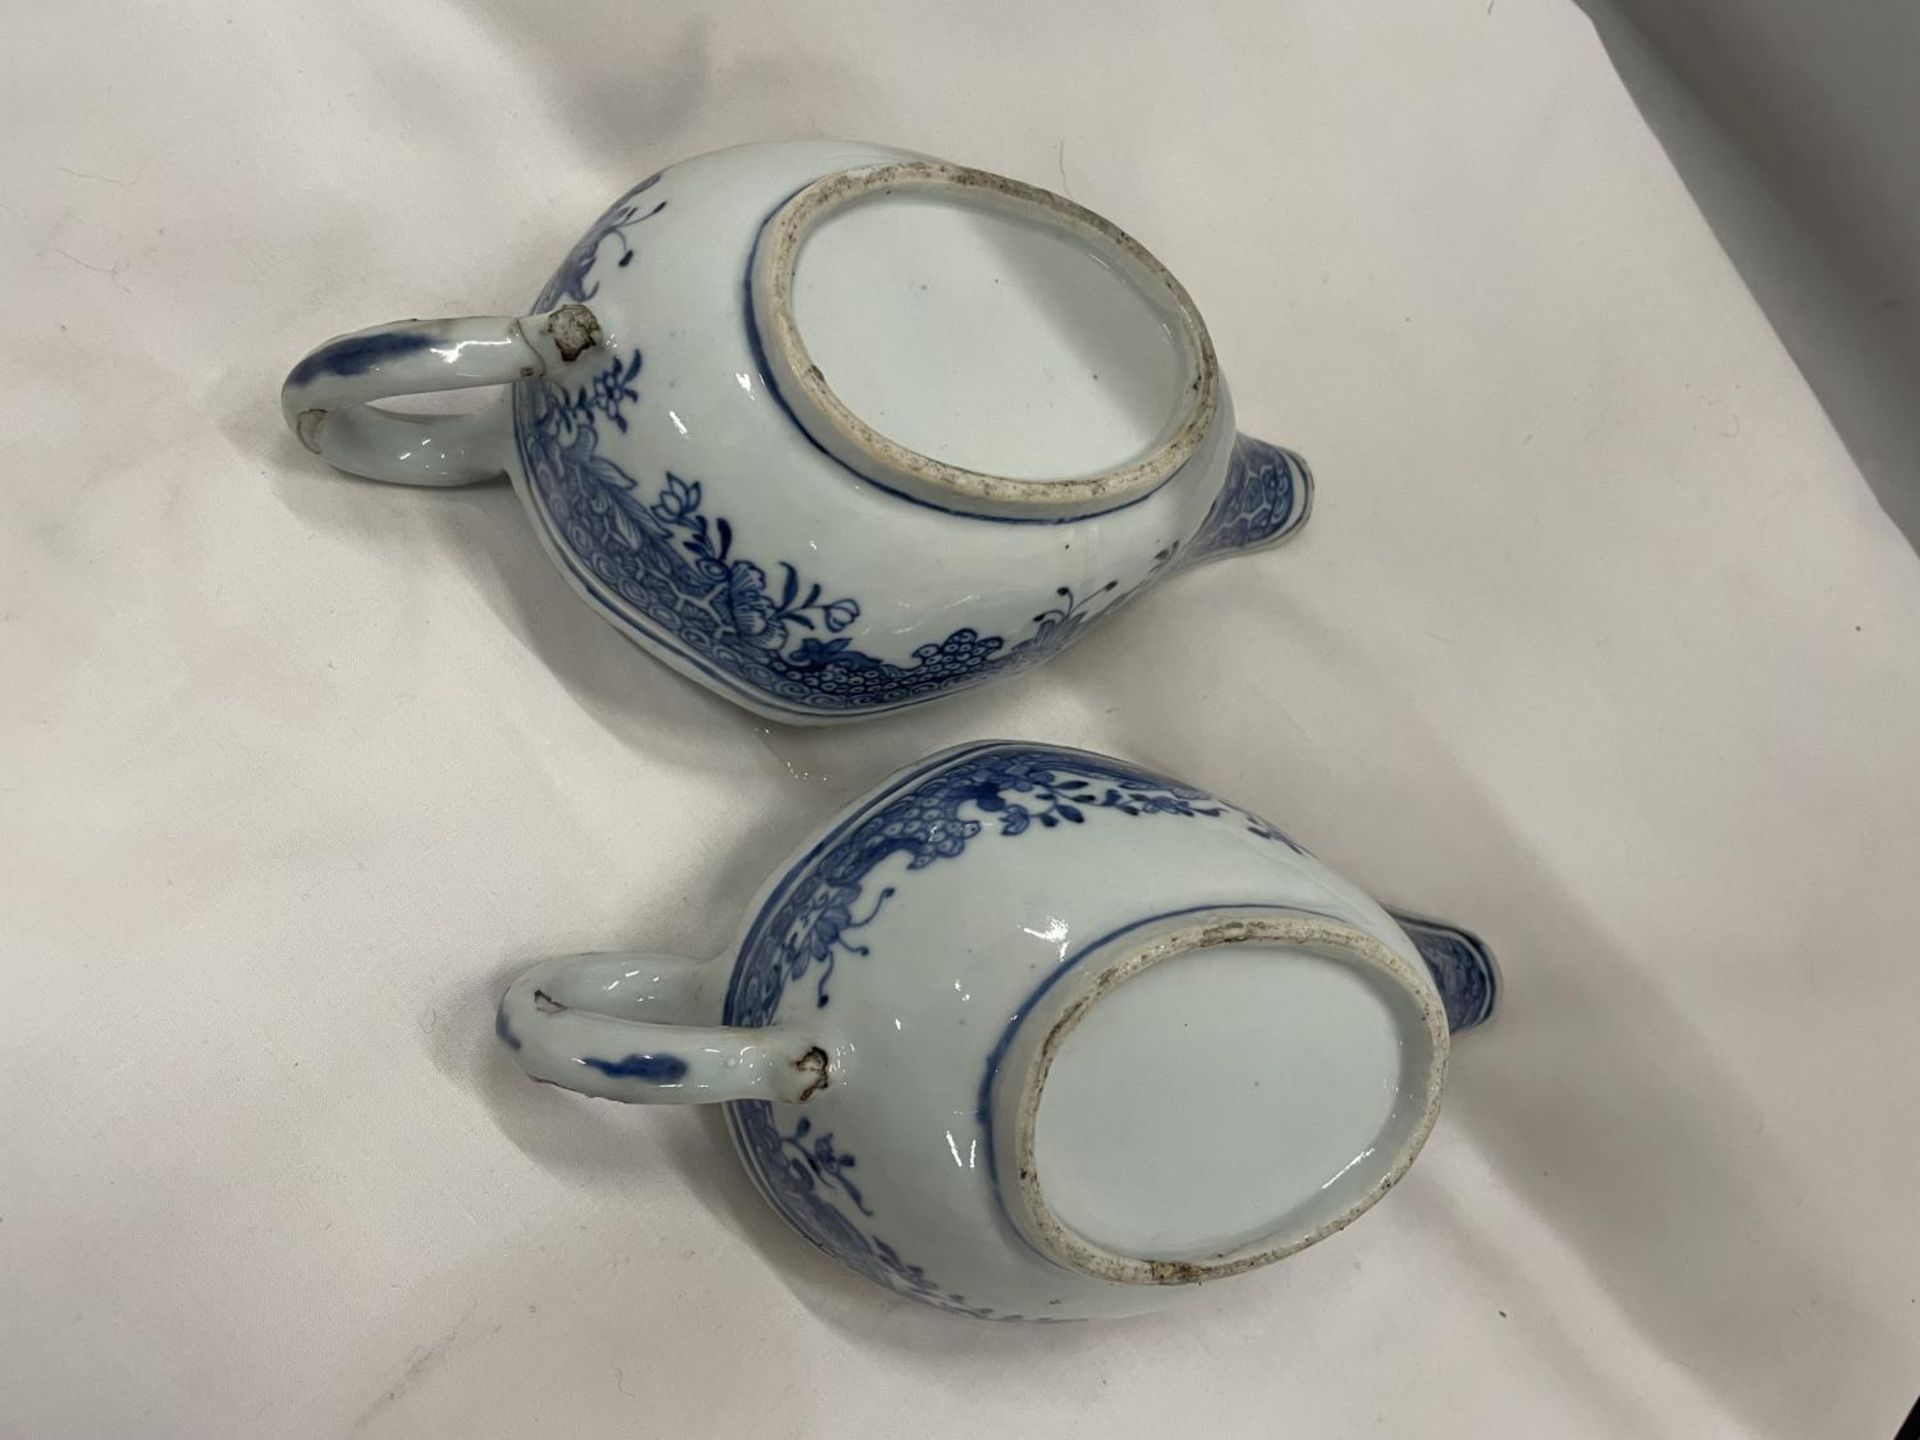 A BELIEVED TO BE LATE 18TH/EARLY 19TH CENTURY CHINESE QING DYNASTY/NANKIN BLUE AND WHITE SAUCE - Image 6 of 8